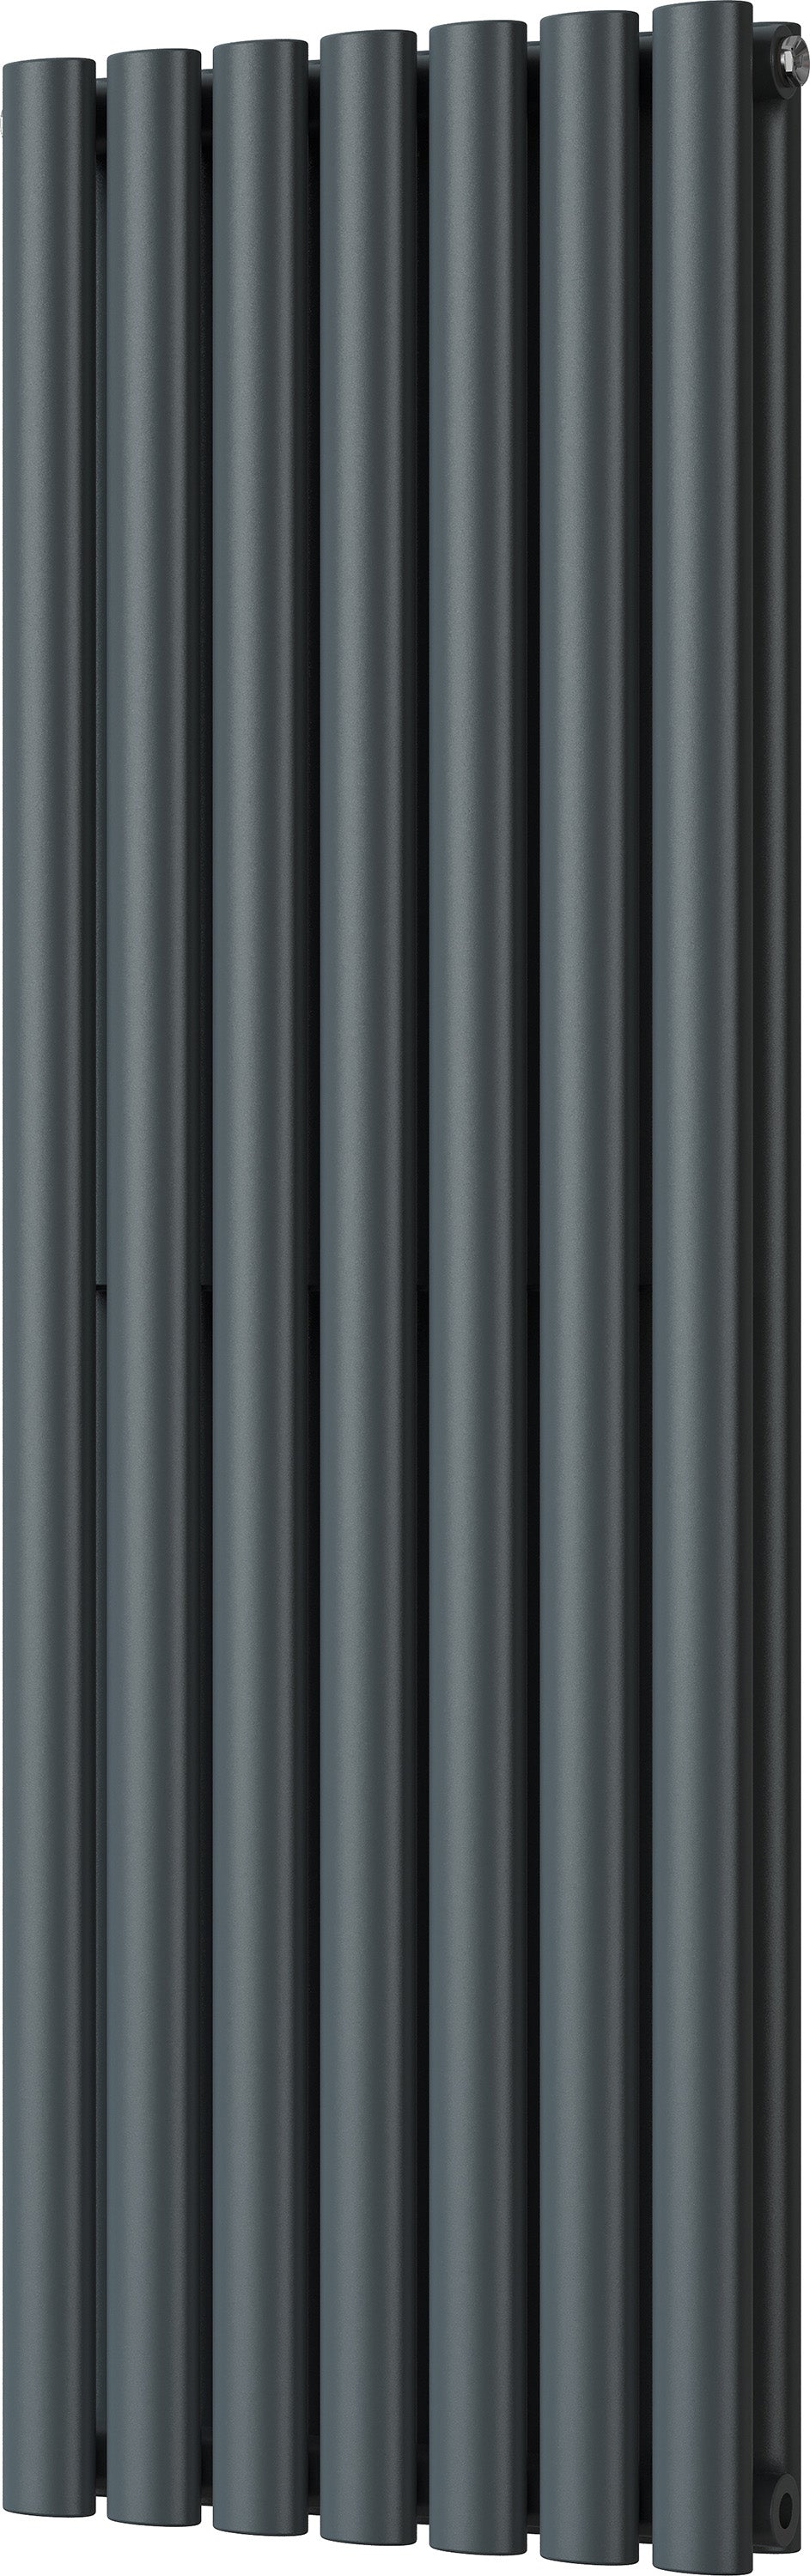 Omeara - Anthracite Vertical Radiator H1200mm x W406mm Double Panel